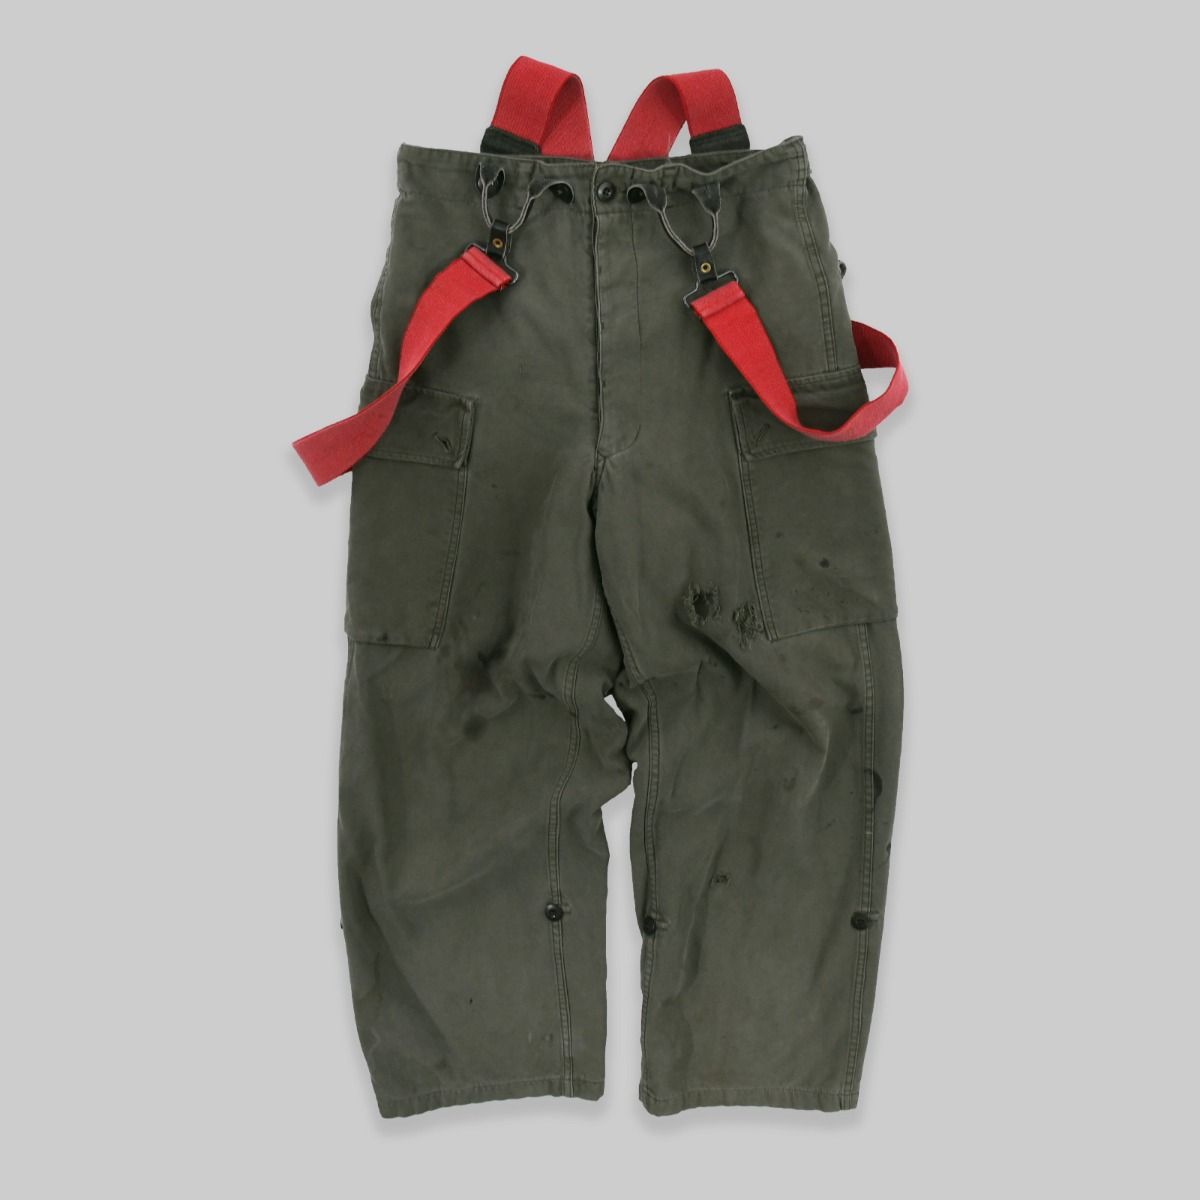 Dutch Military 1988 Cargo Trousers w/ Adjustable Suspenders